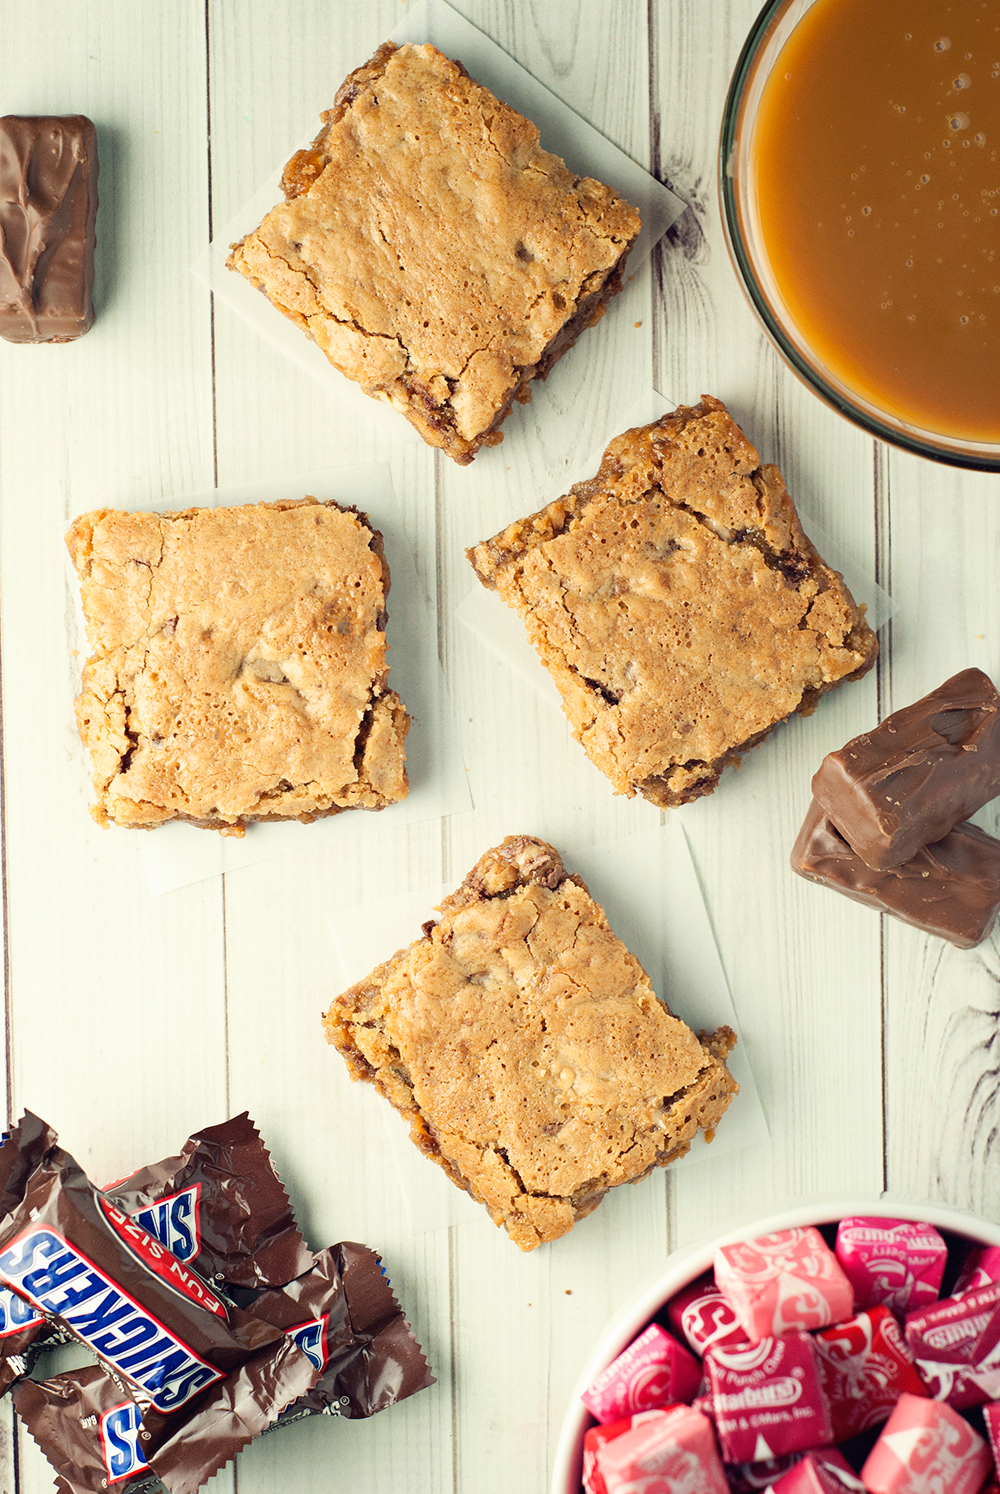 In need of a new, decadent, EASY dessert? Then try these amazing salted caramel Snickers cookie bars!